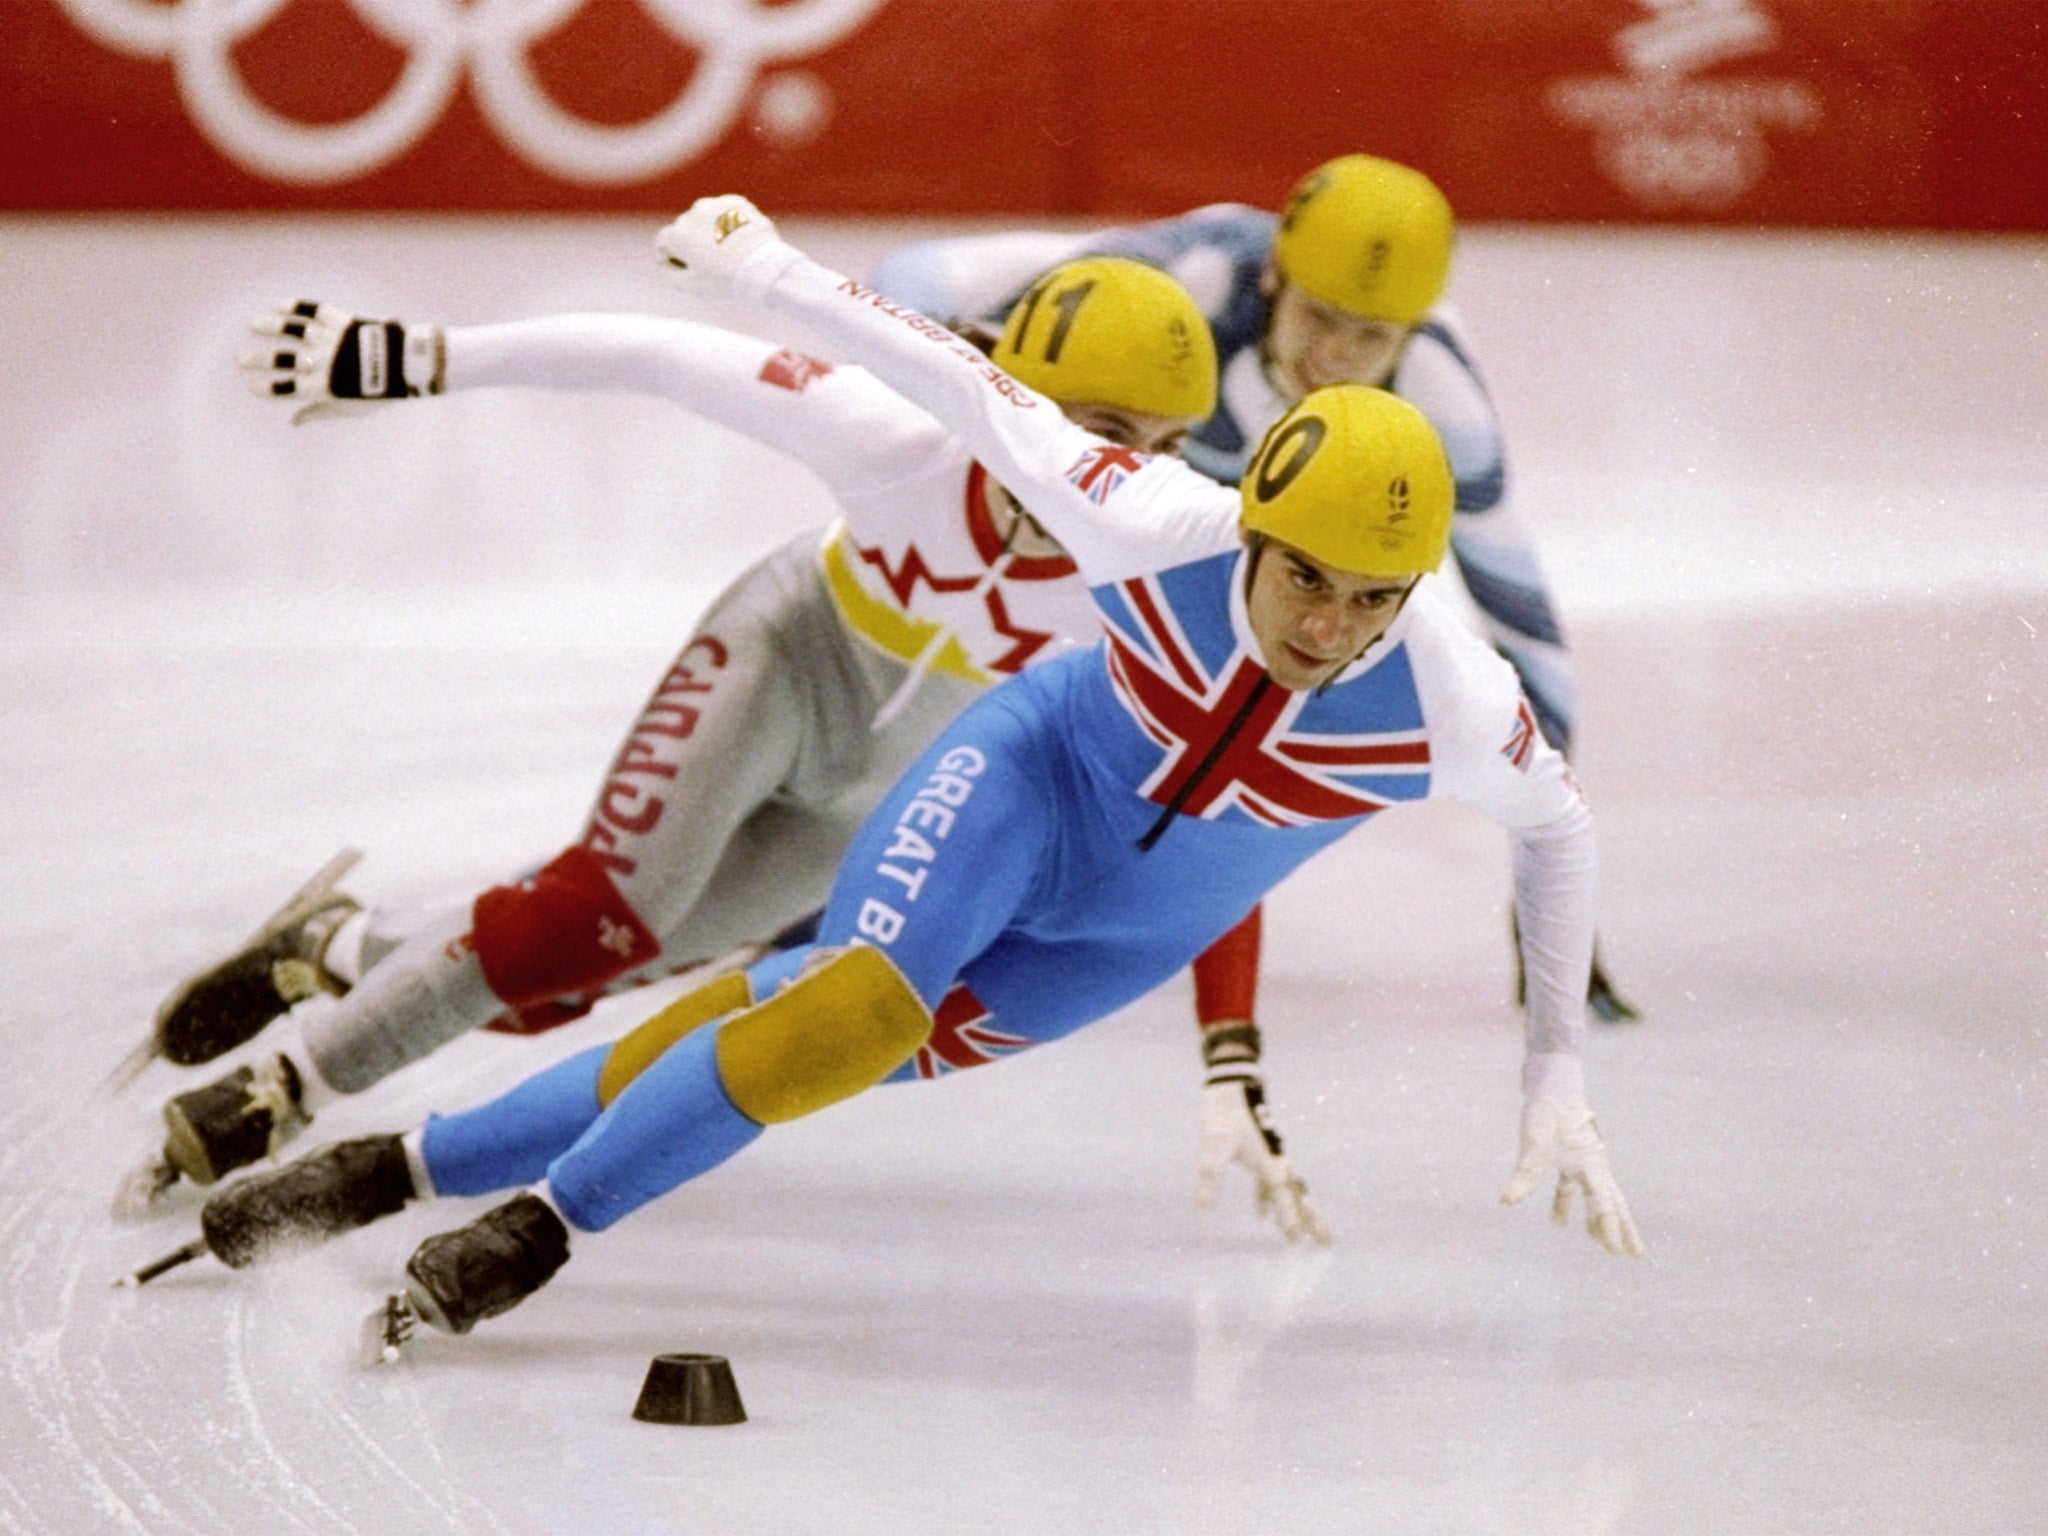 Britain are expected to take their strongest-ever team to Sochi